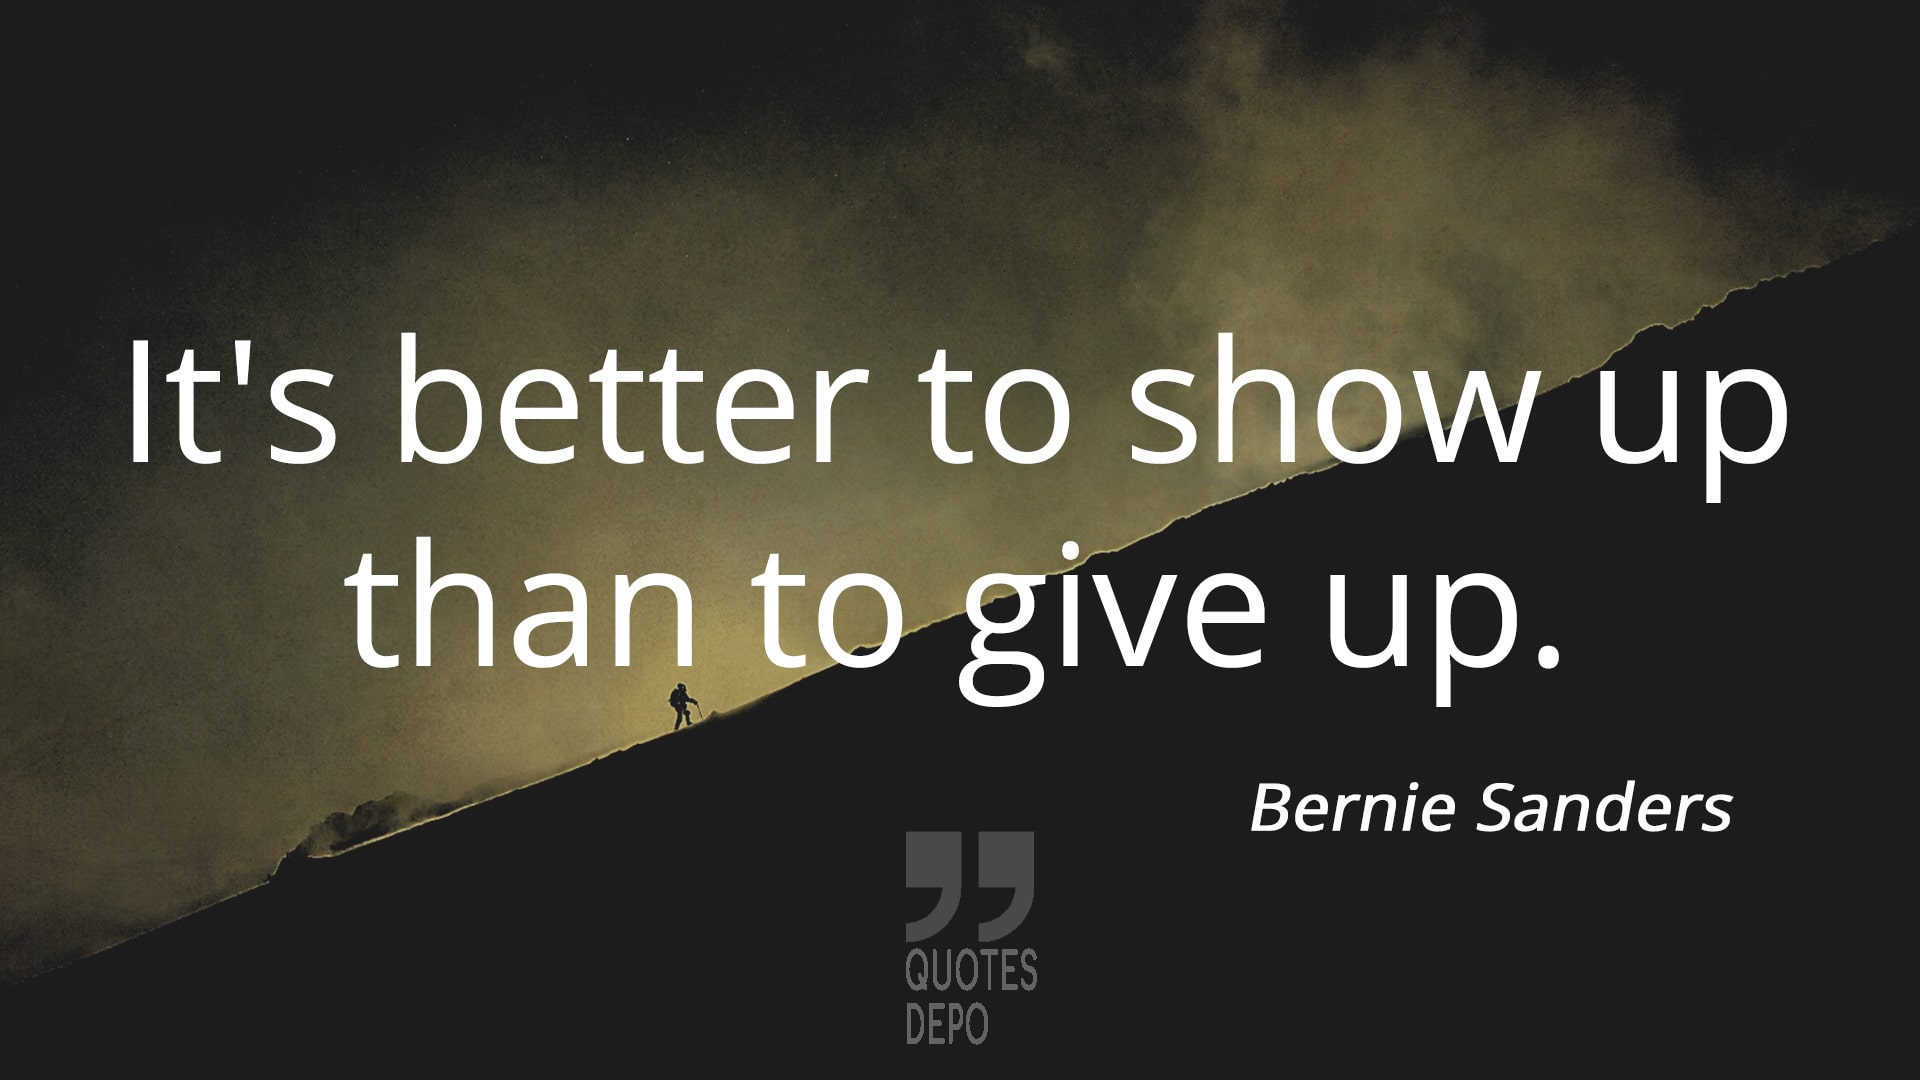 it's better to show up than to give up - bernie sanders quotes